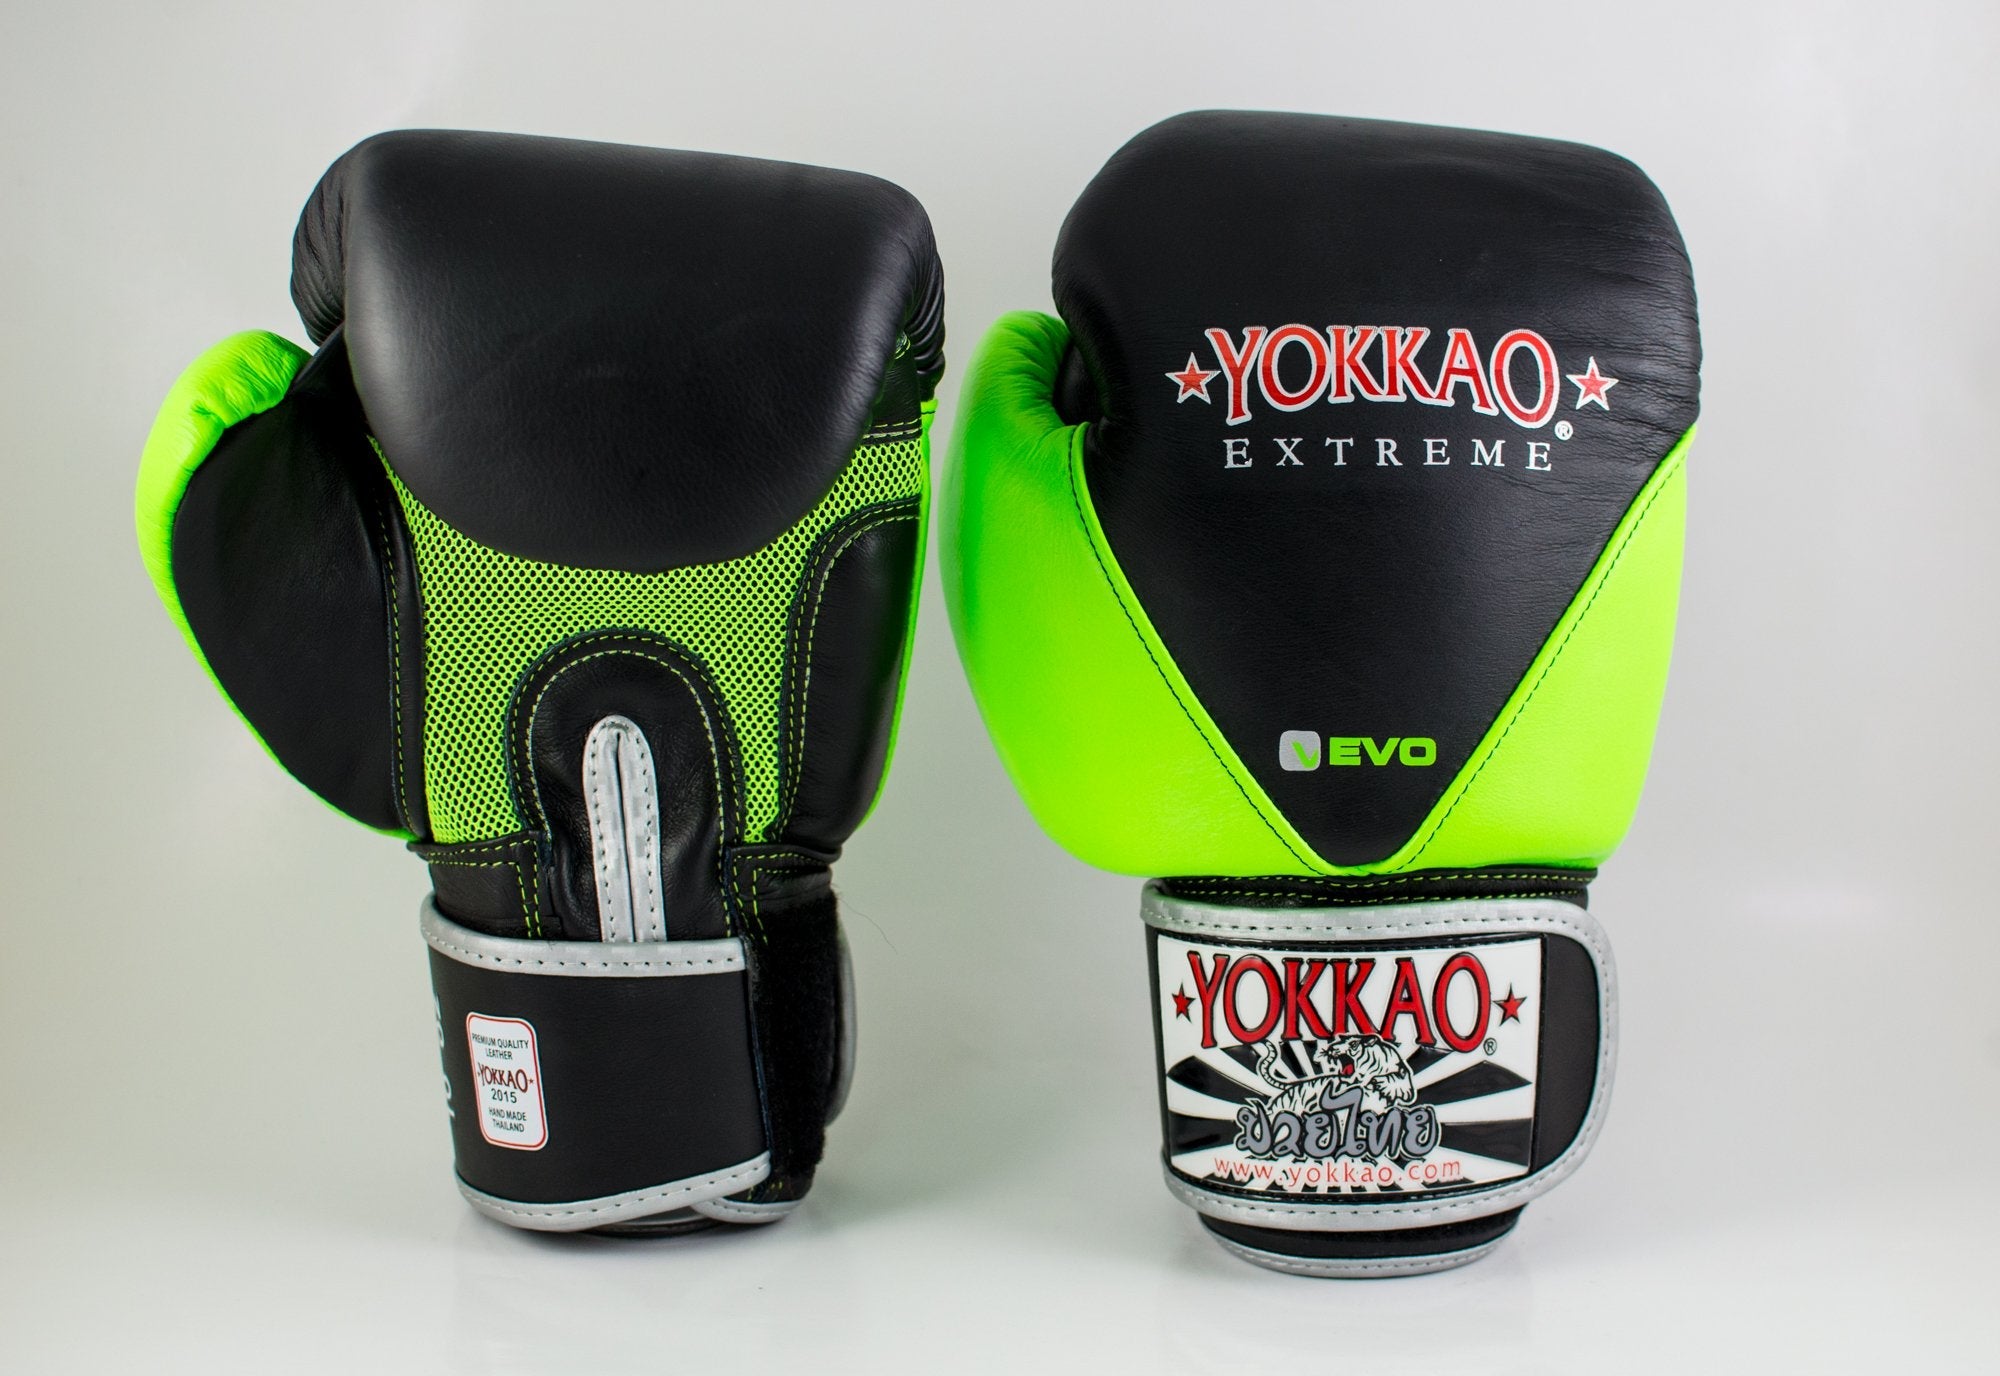 YOKKAO EXTREME innovative collection: a limited edition!